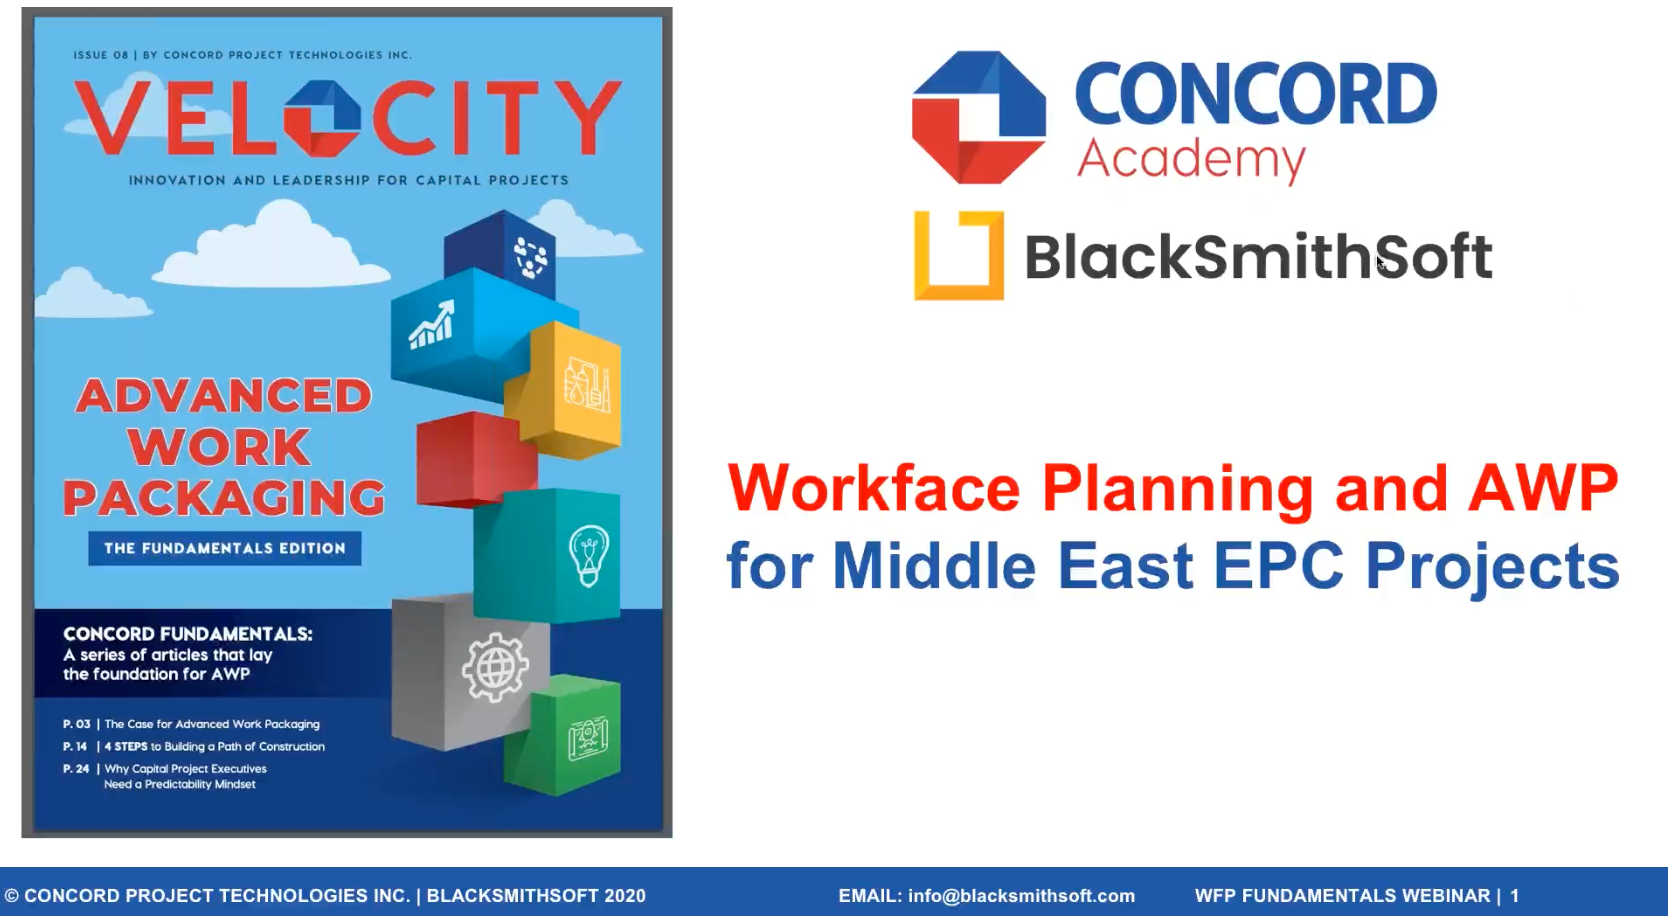 WATCH: Workface Planning and AWP for Middle East EPC Projects Webinar